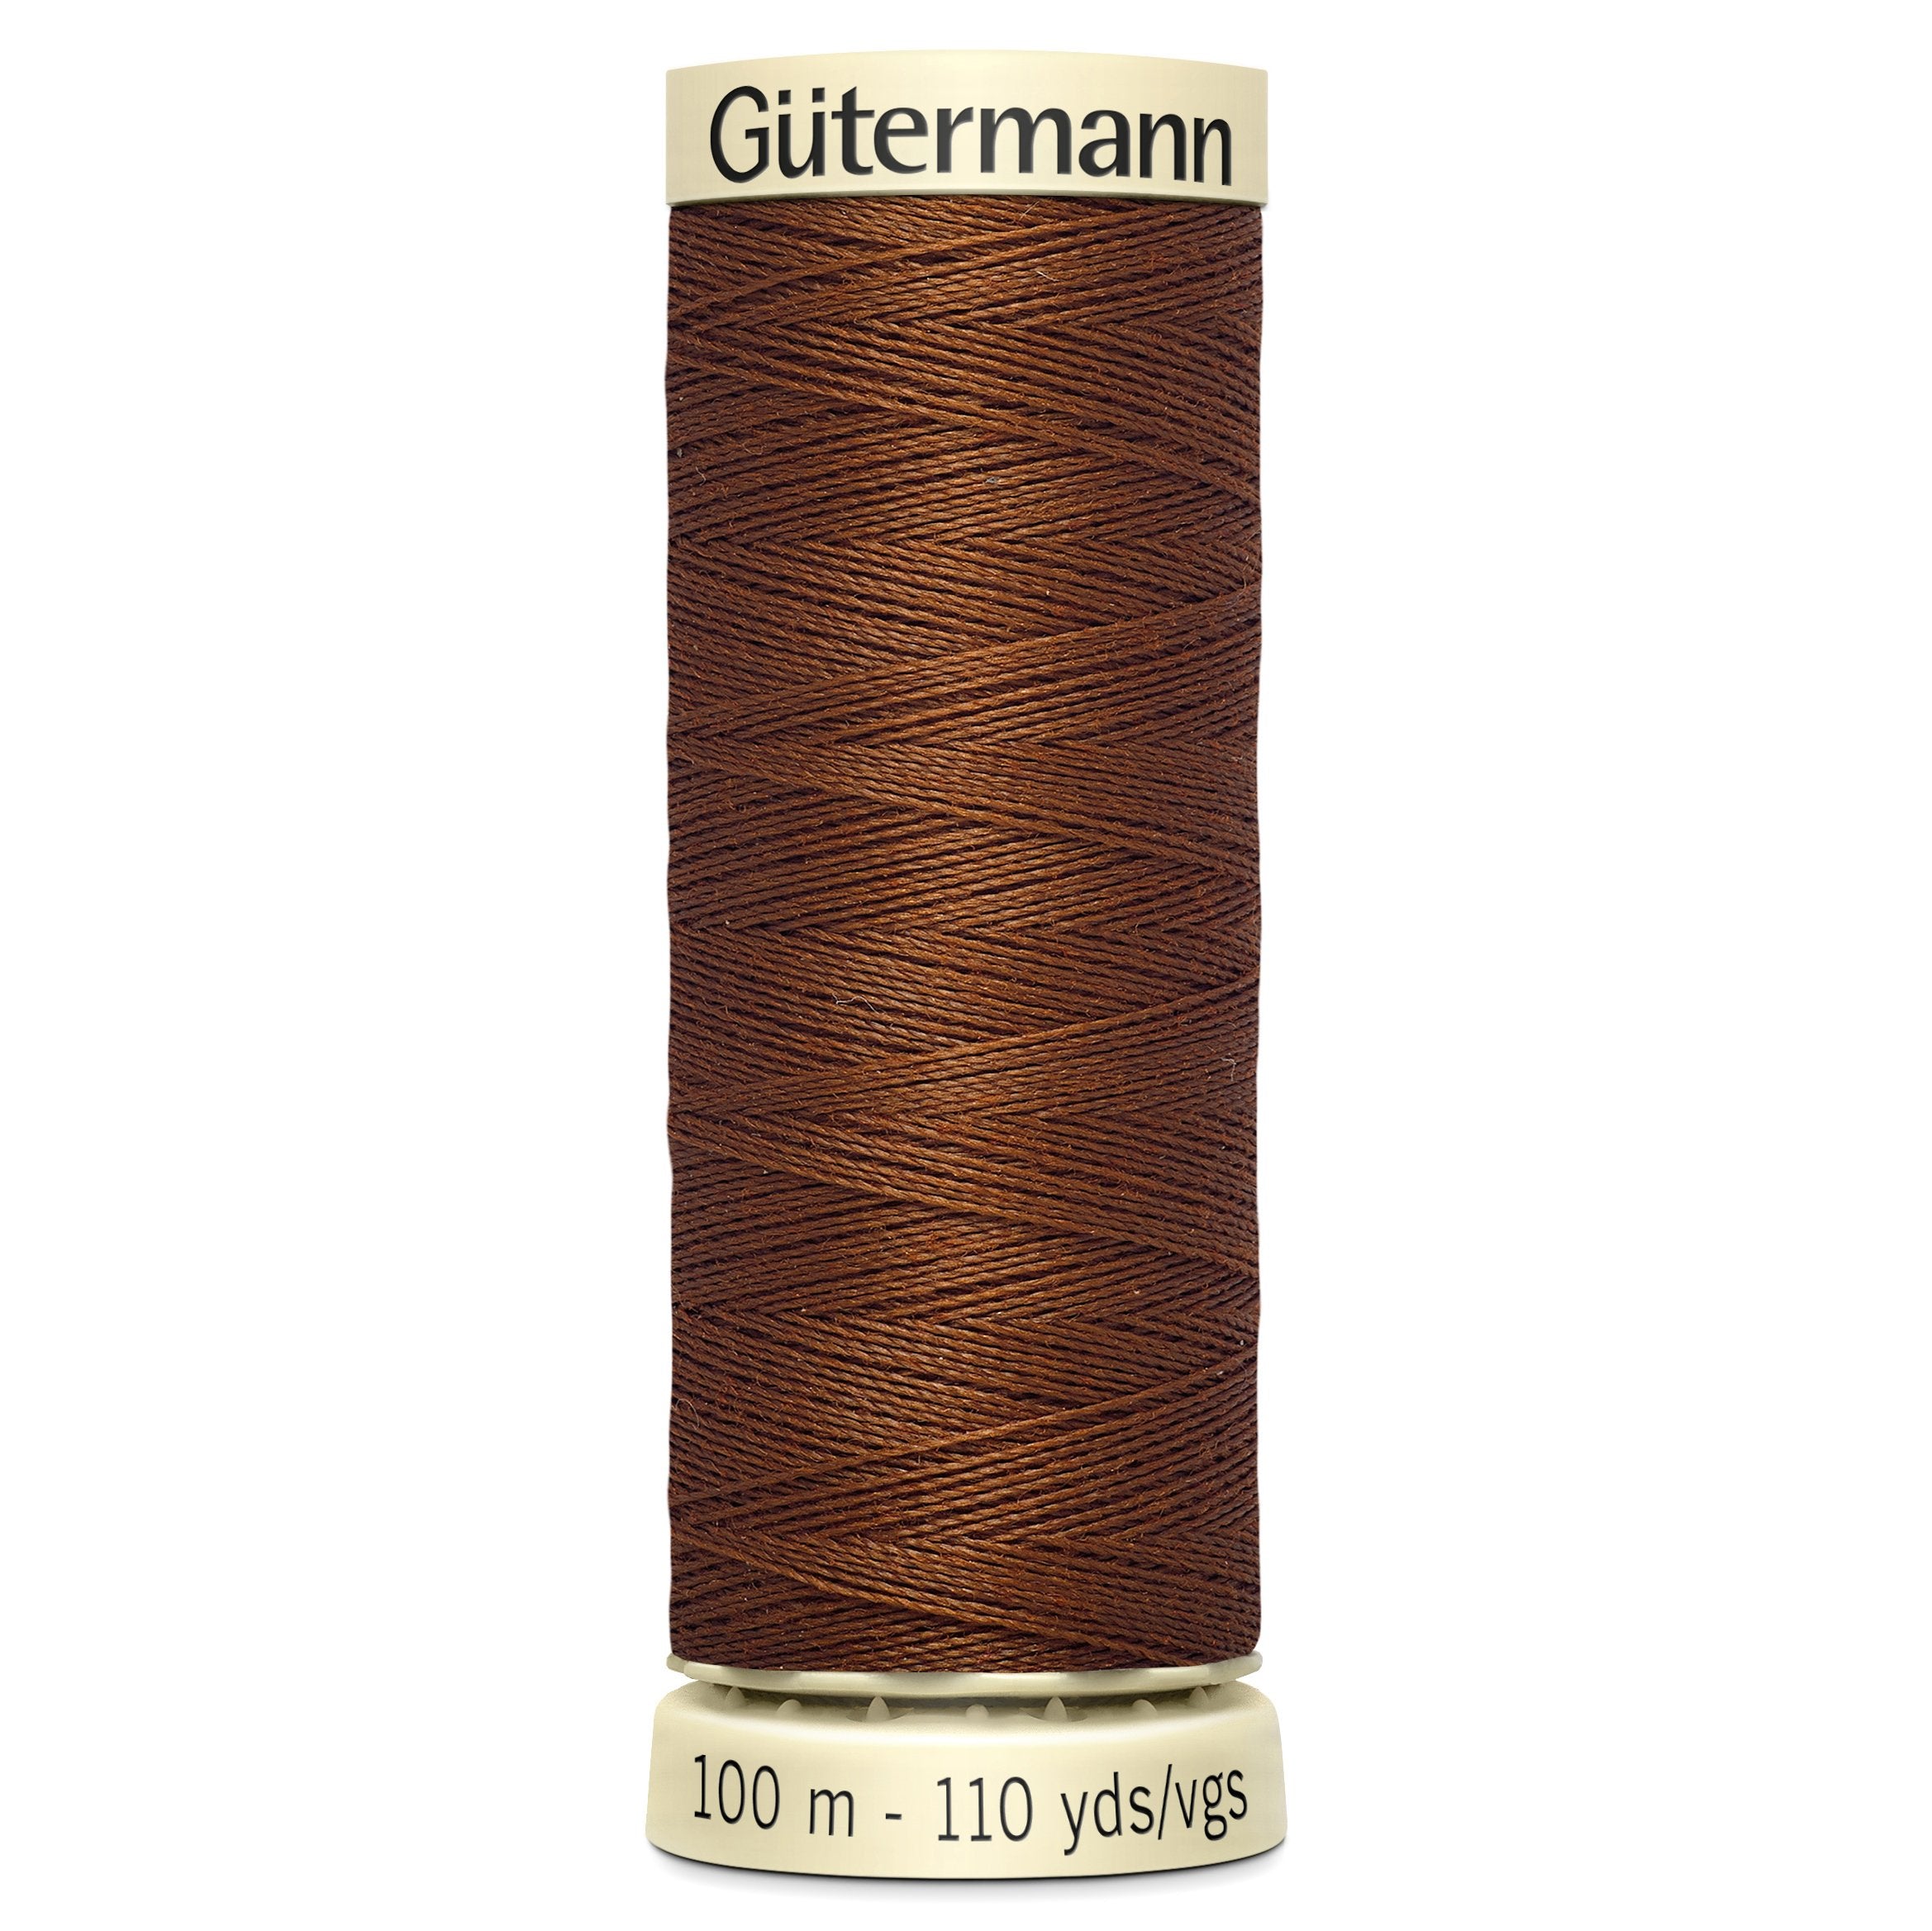 Gutermann Sew All Thread colour 650 Light Brown from Jaycotts Sewing Supplies